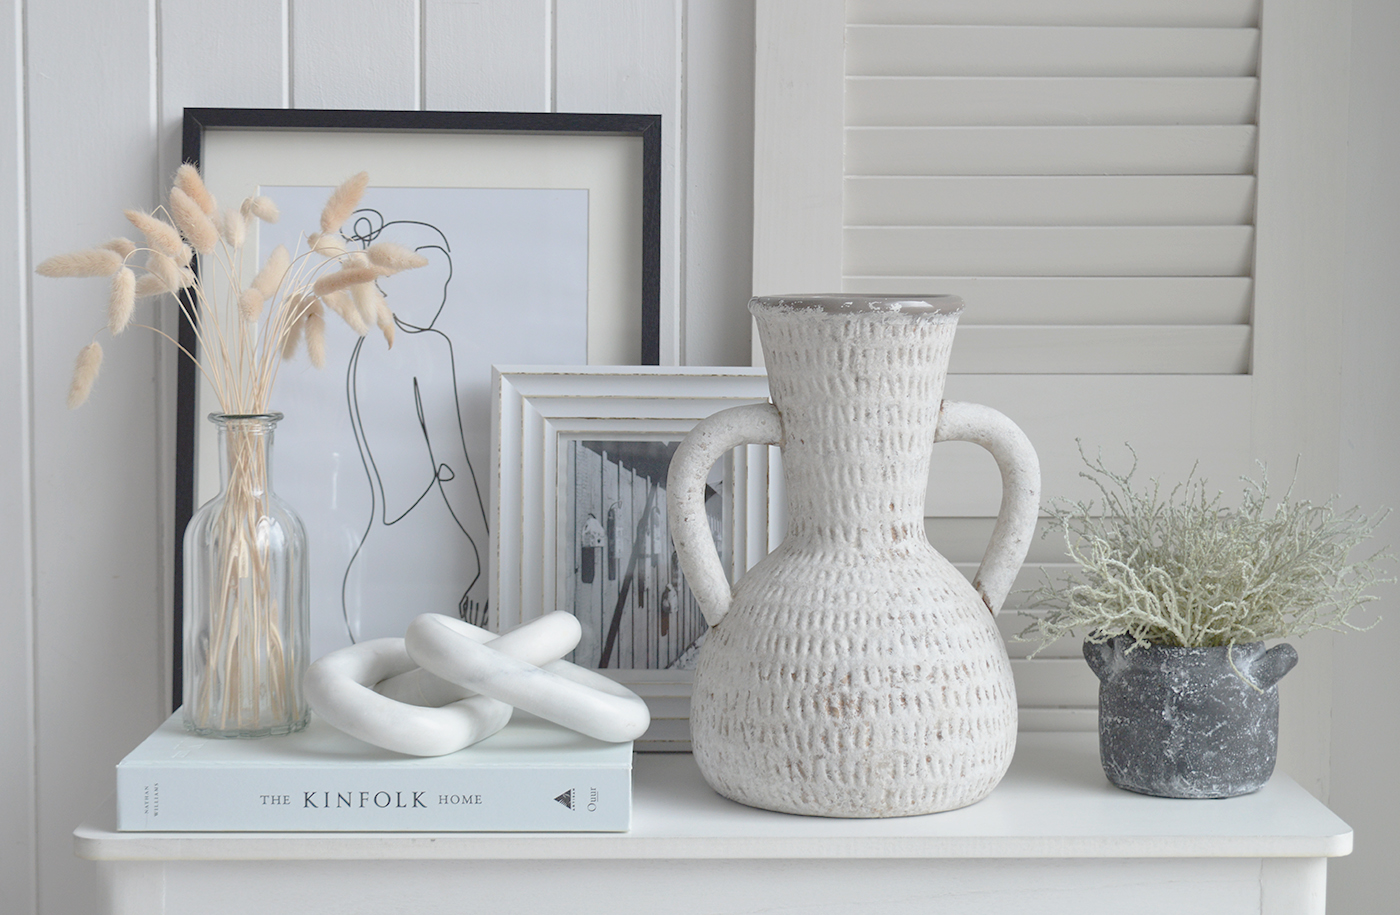 Betone Vase - Console table and shelf styling and decor for New England and Hamptons Interiors, and accessories for country, coastal and modern farmhouse homes